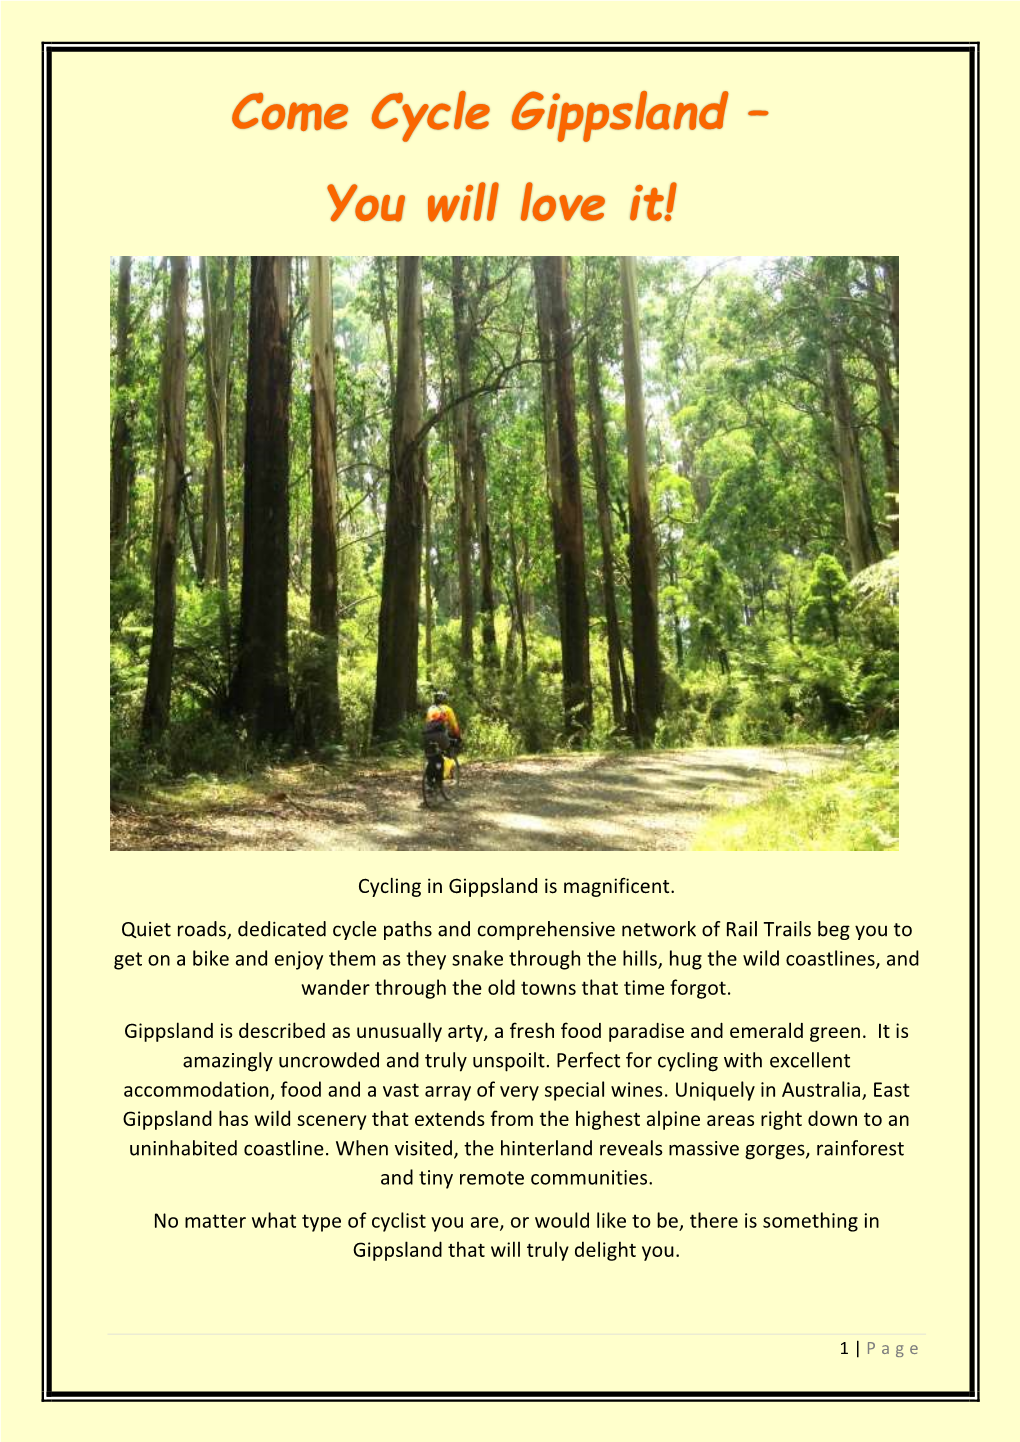 Come Cycle Gippsland – You Will Love It!